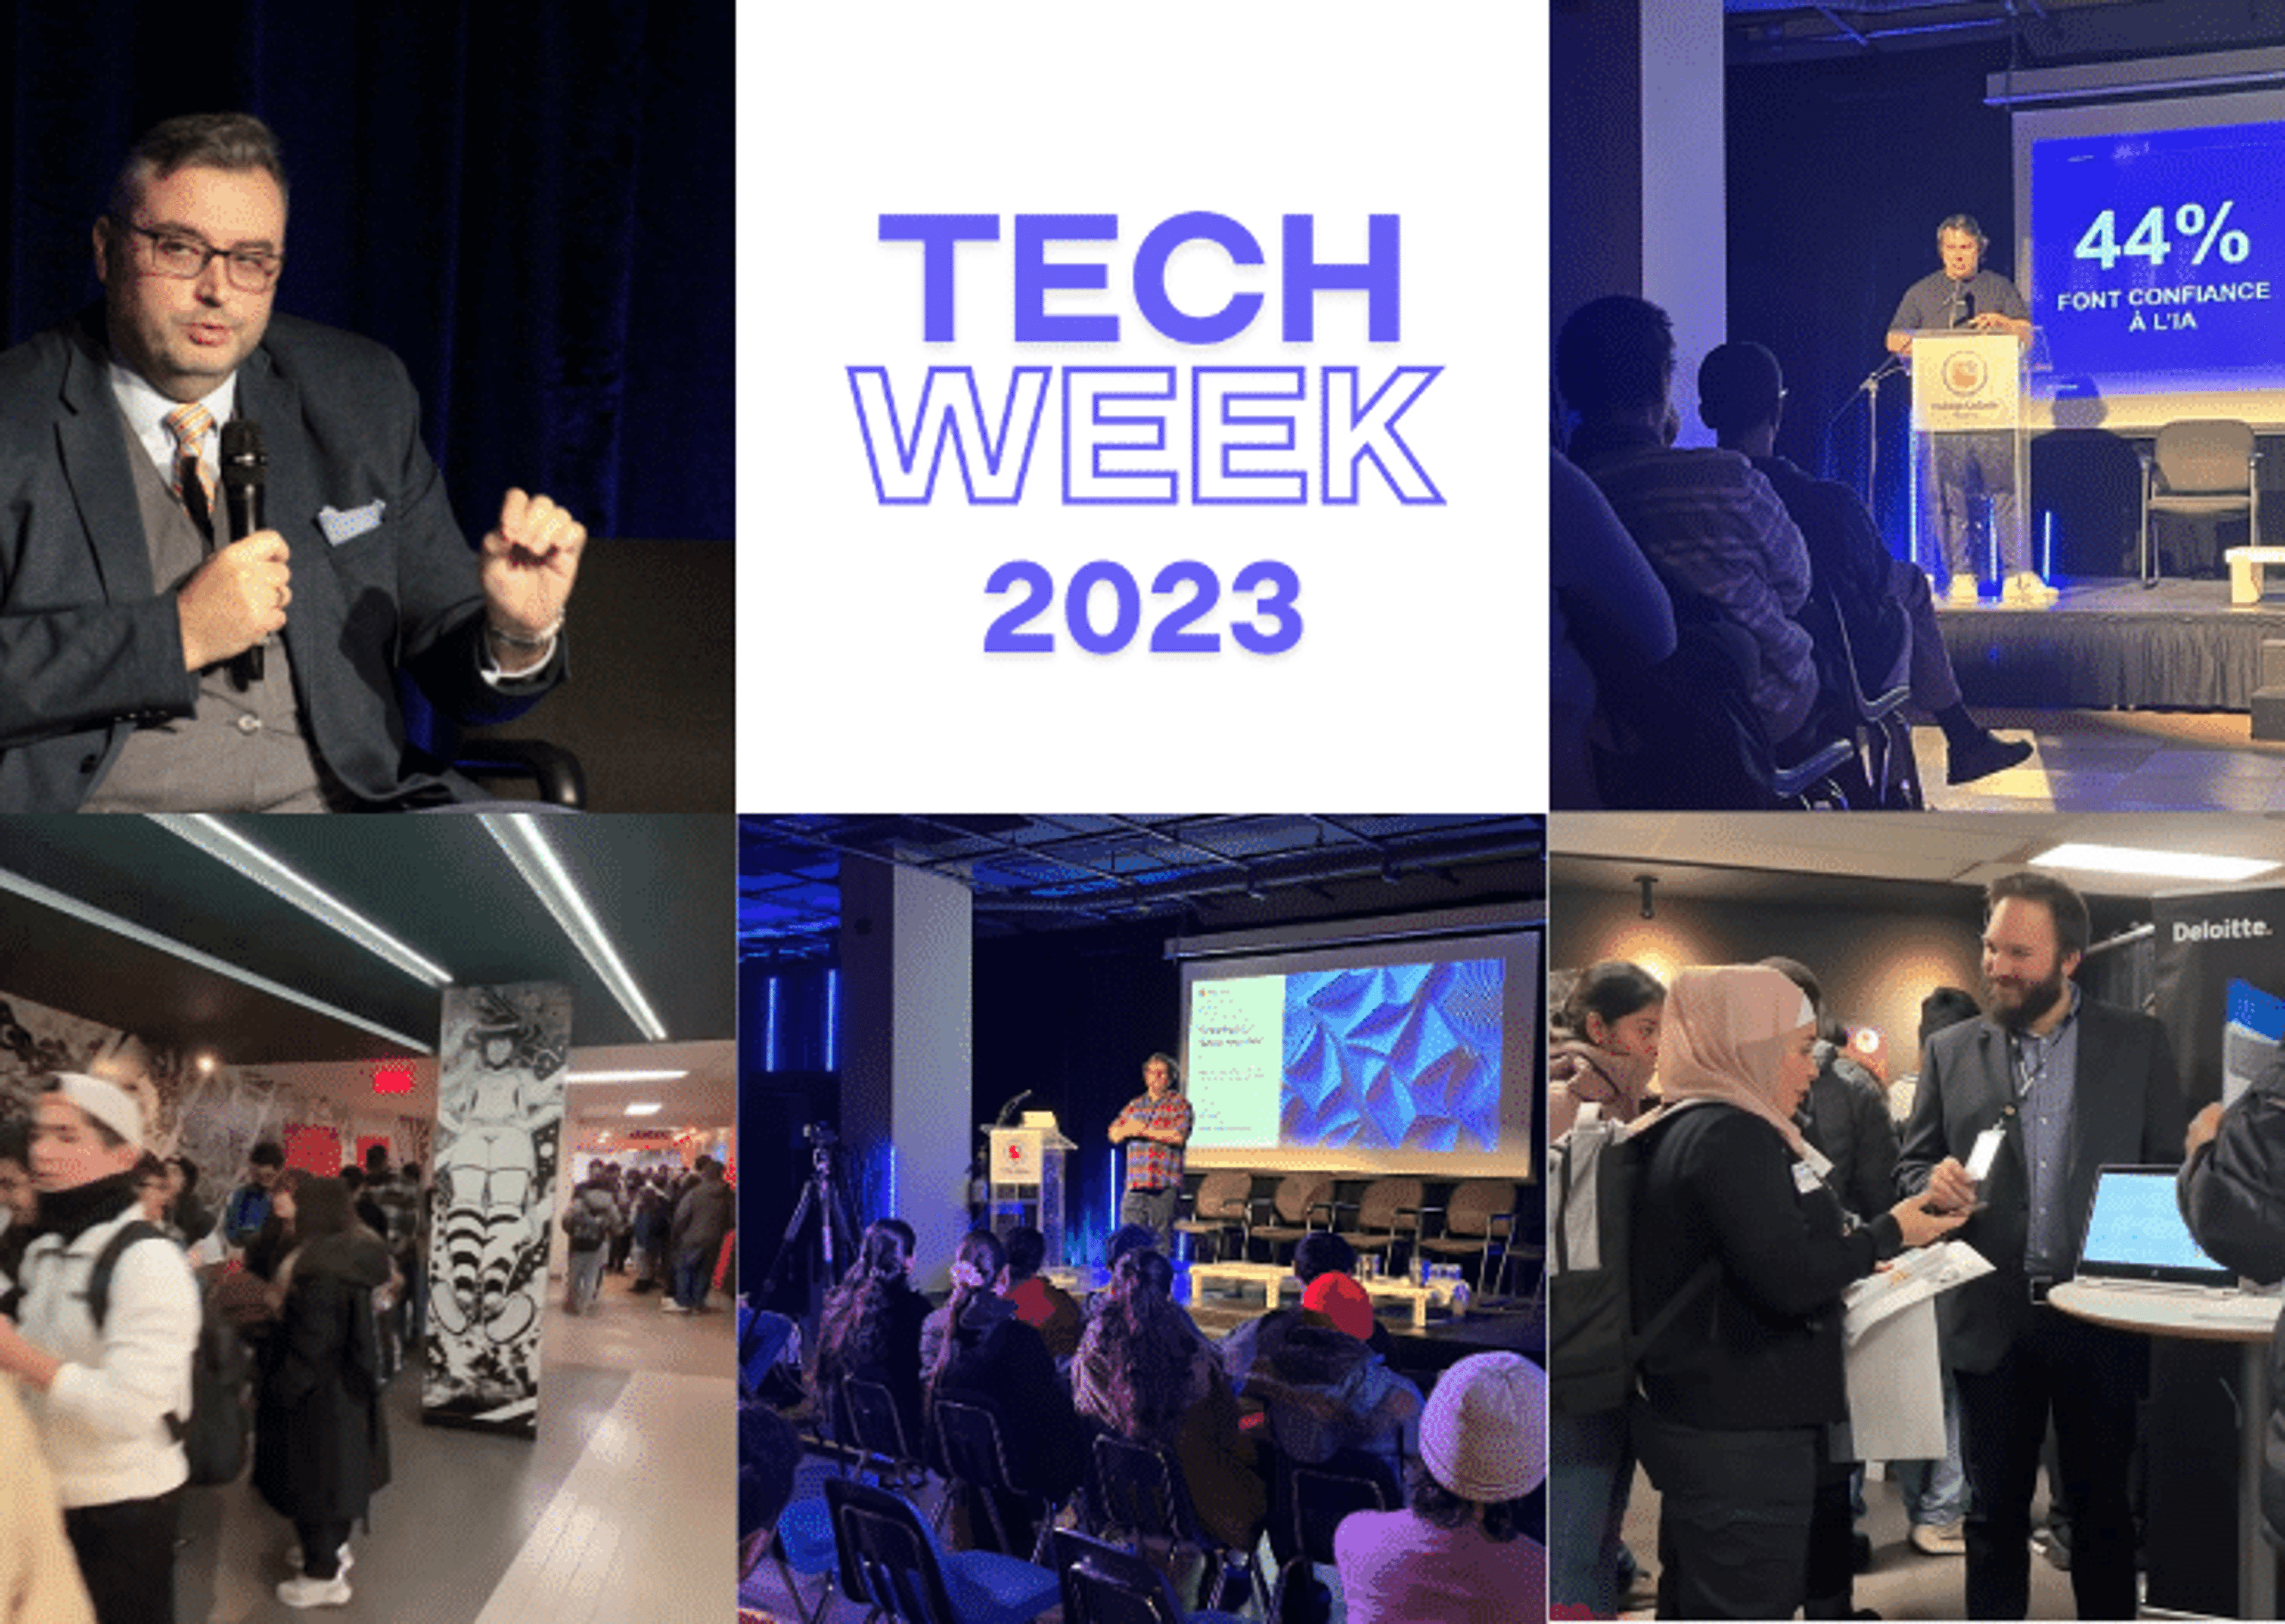 Collage featuring speakers, audience engagement, and networking at Tech Week 2023, emphasizing technology's community and discussion.